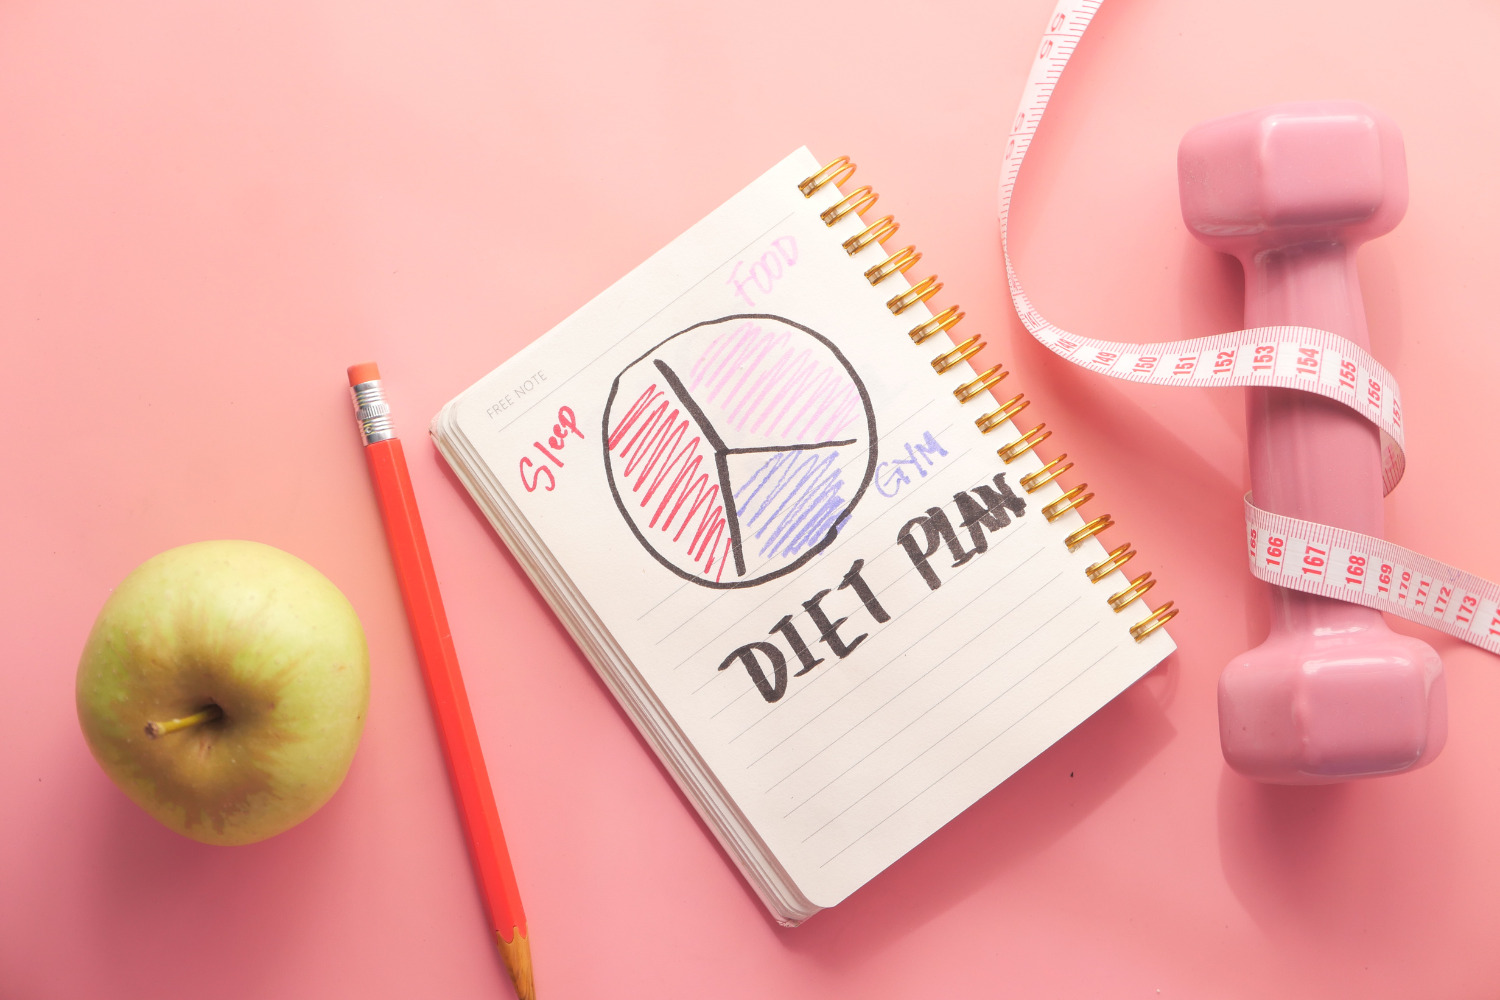 What is the best diet for losing weight?